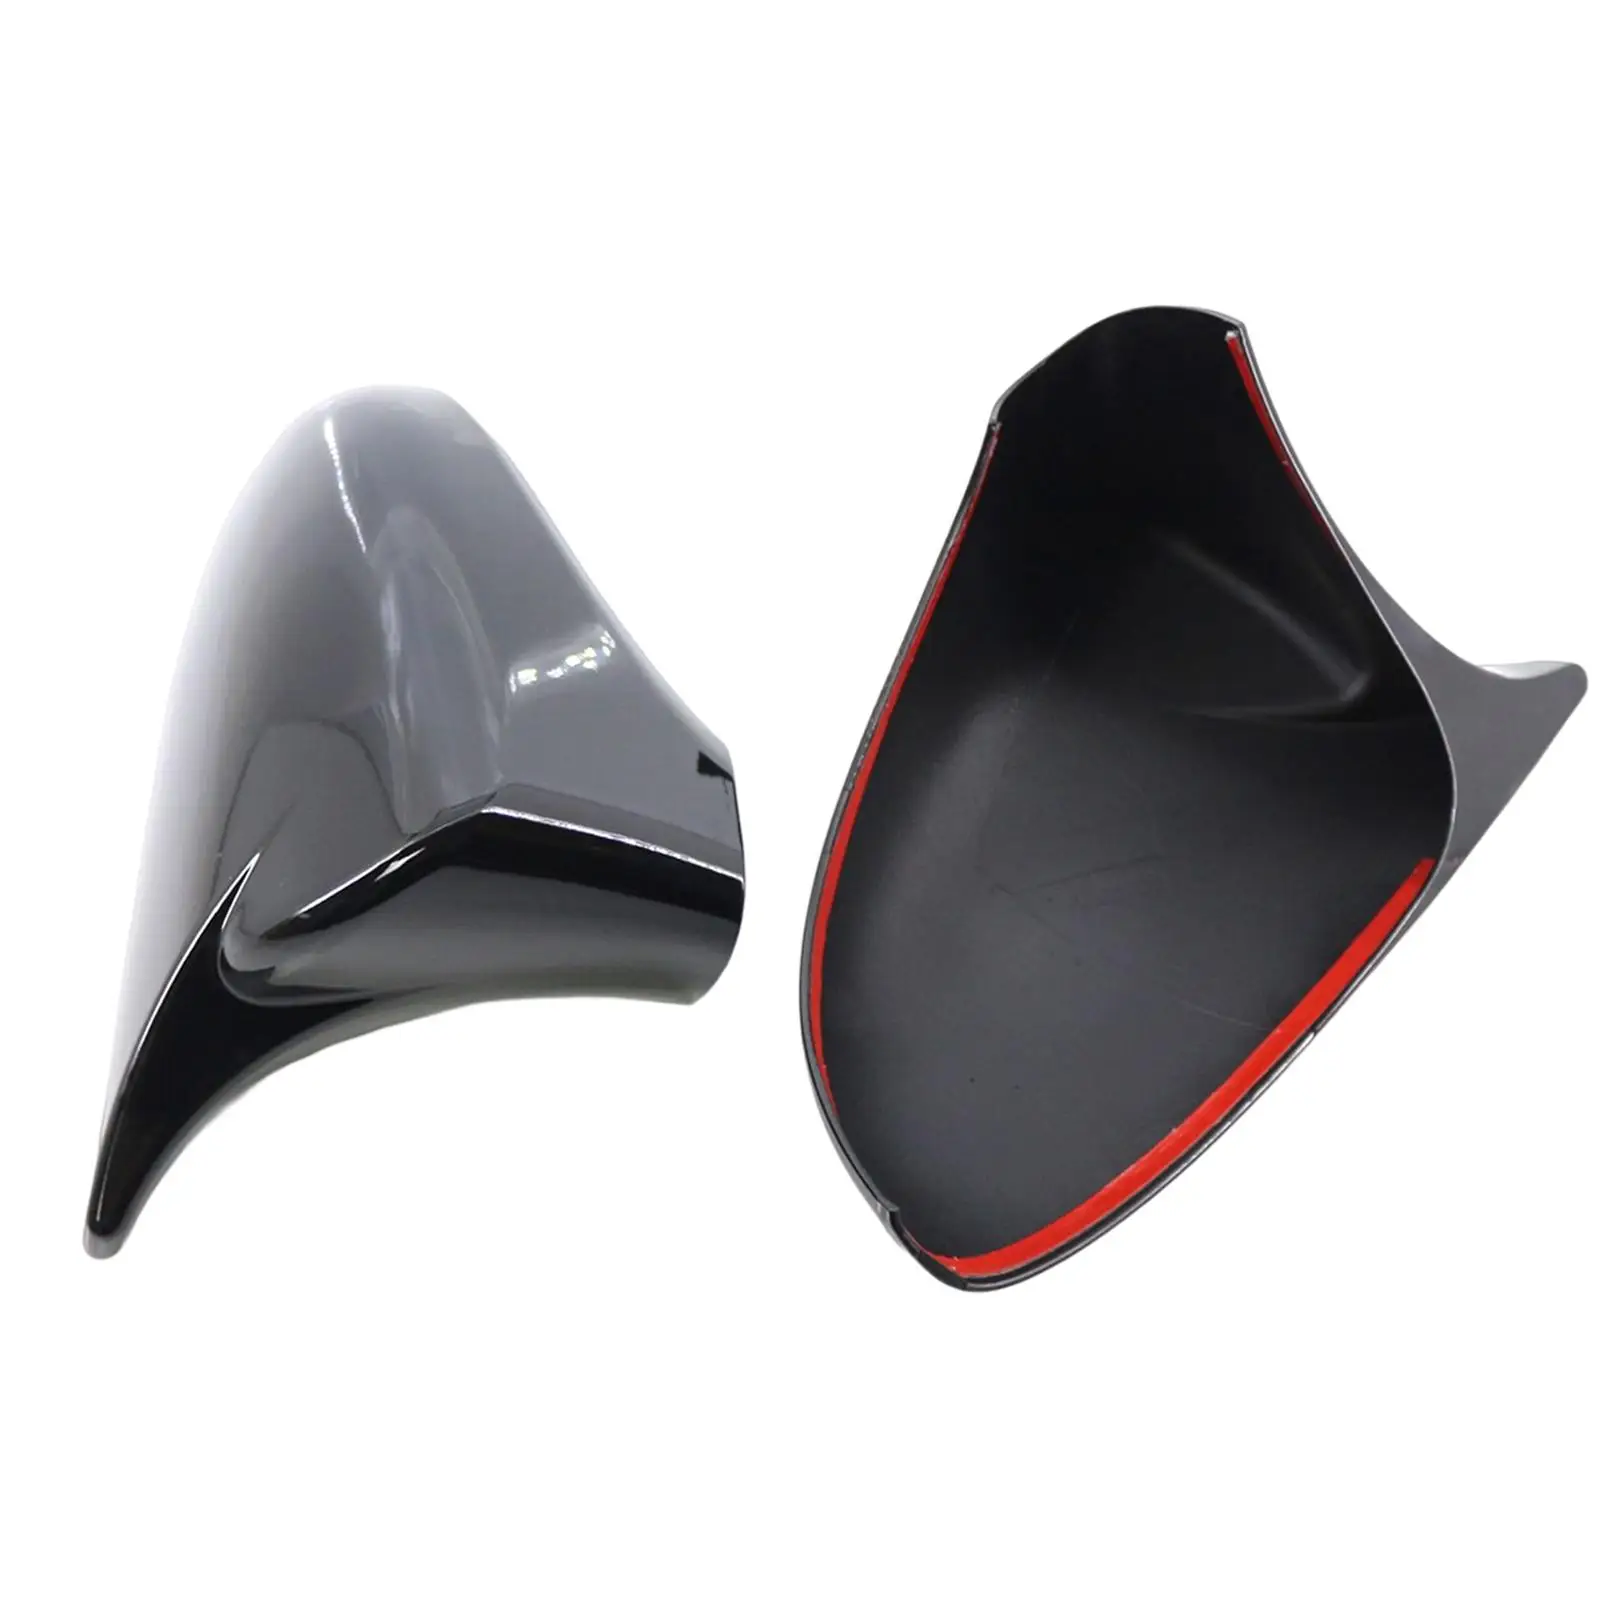 2 Pieces Vehicle Side View Mirror Covers 8794A30E00B1 for Lexus GS Gsf